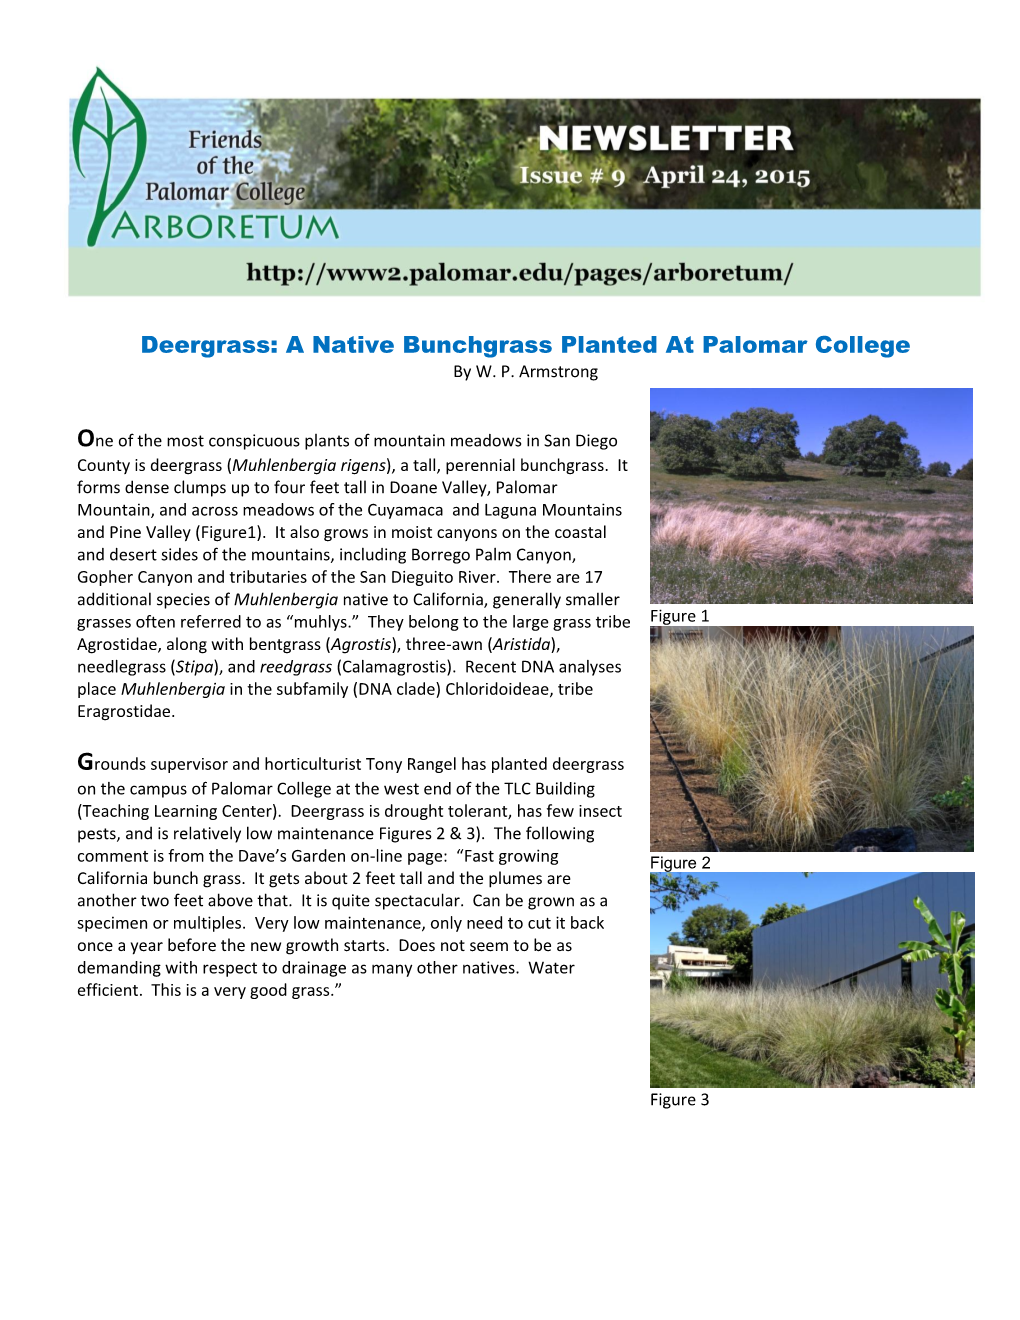 Deergrass: a Native Bunchgrass Planted at Palomar College by W